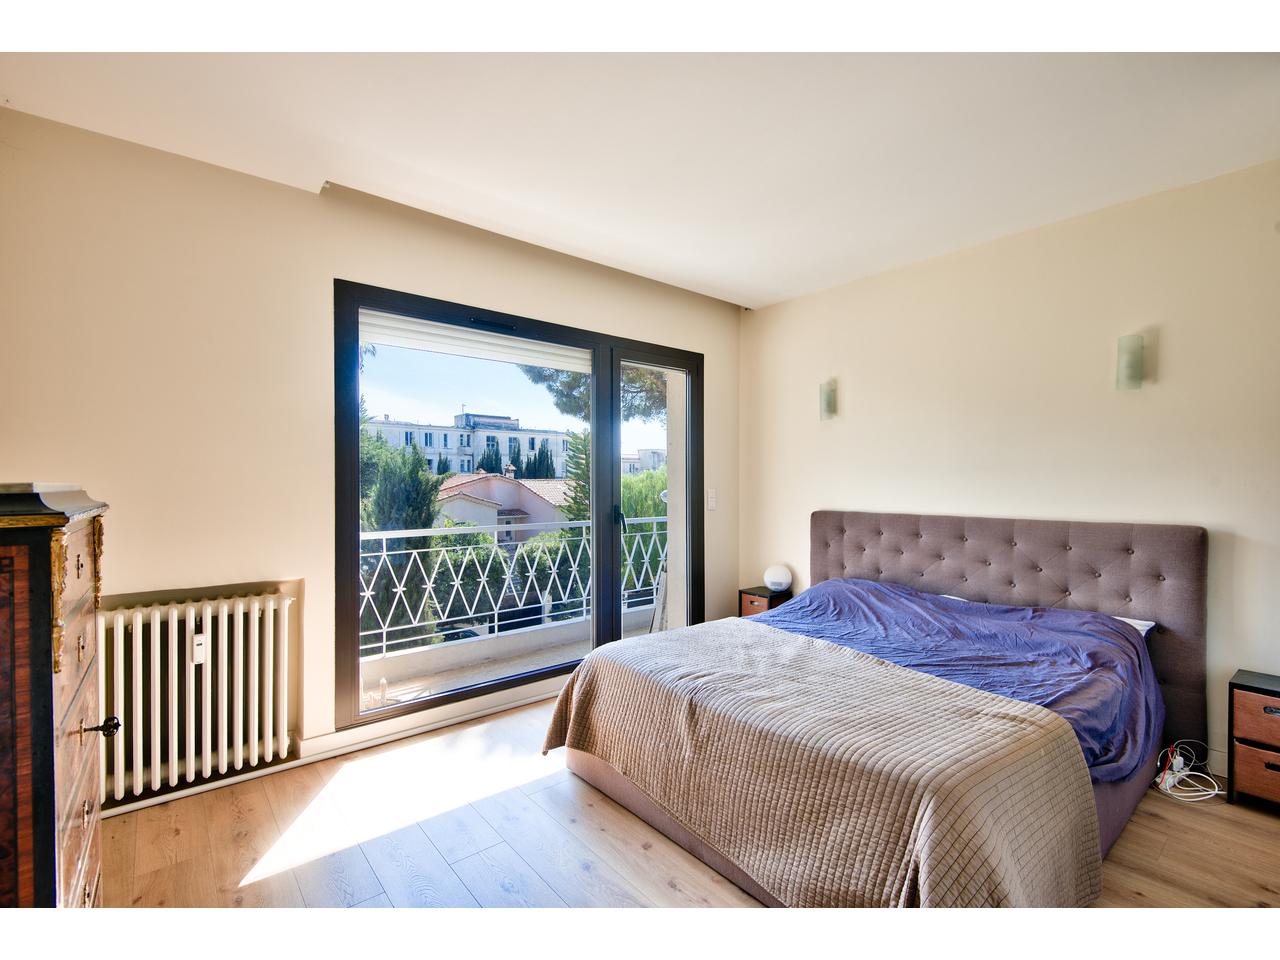 Nice Riviera - Real estate agency Nice Côte d'Azur | Appartement  5 Rooms 135m2  for sale   800 000 €